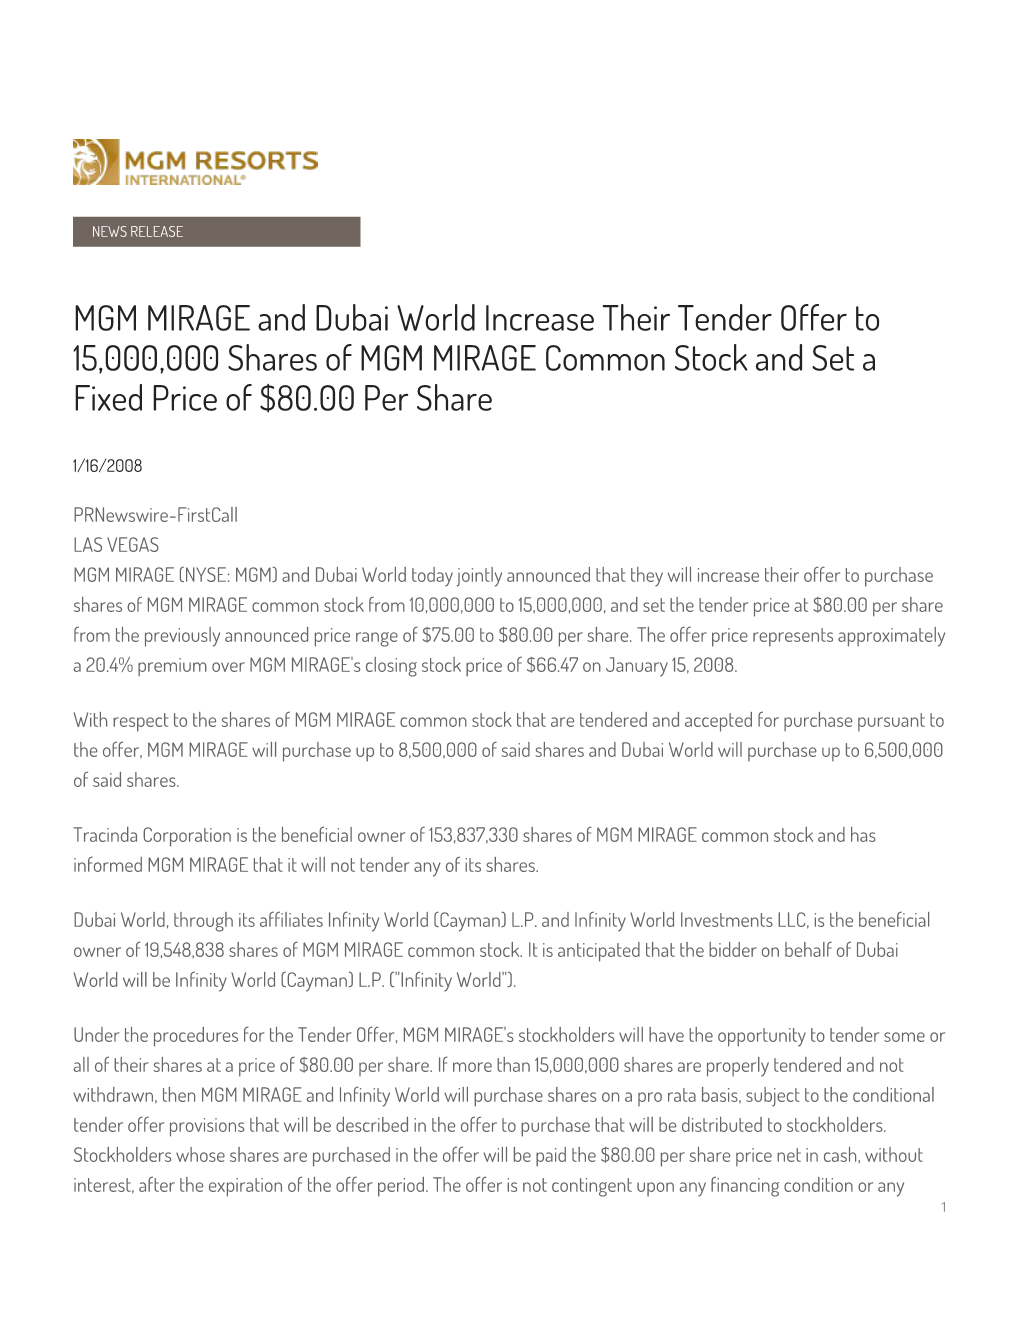 MGM MIRAGE and Dubai World Increase Their Tender Offer to 15,000,000 Shares of MGM MIRAGE Common Stock and Set a Fixed Price of $80.00 Per Share